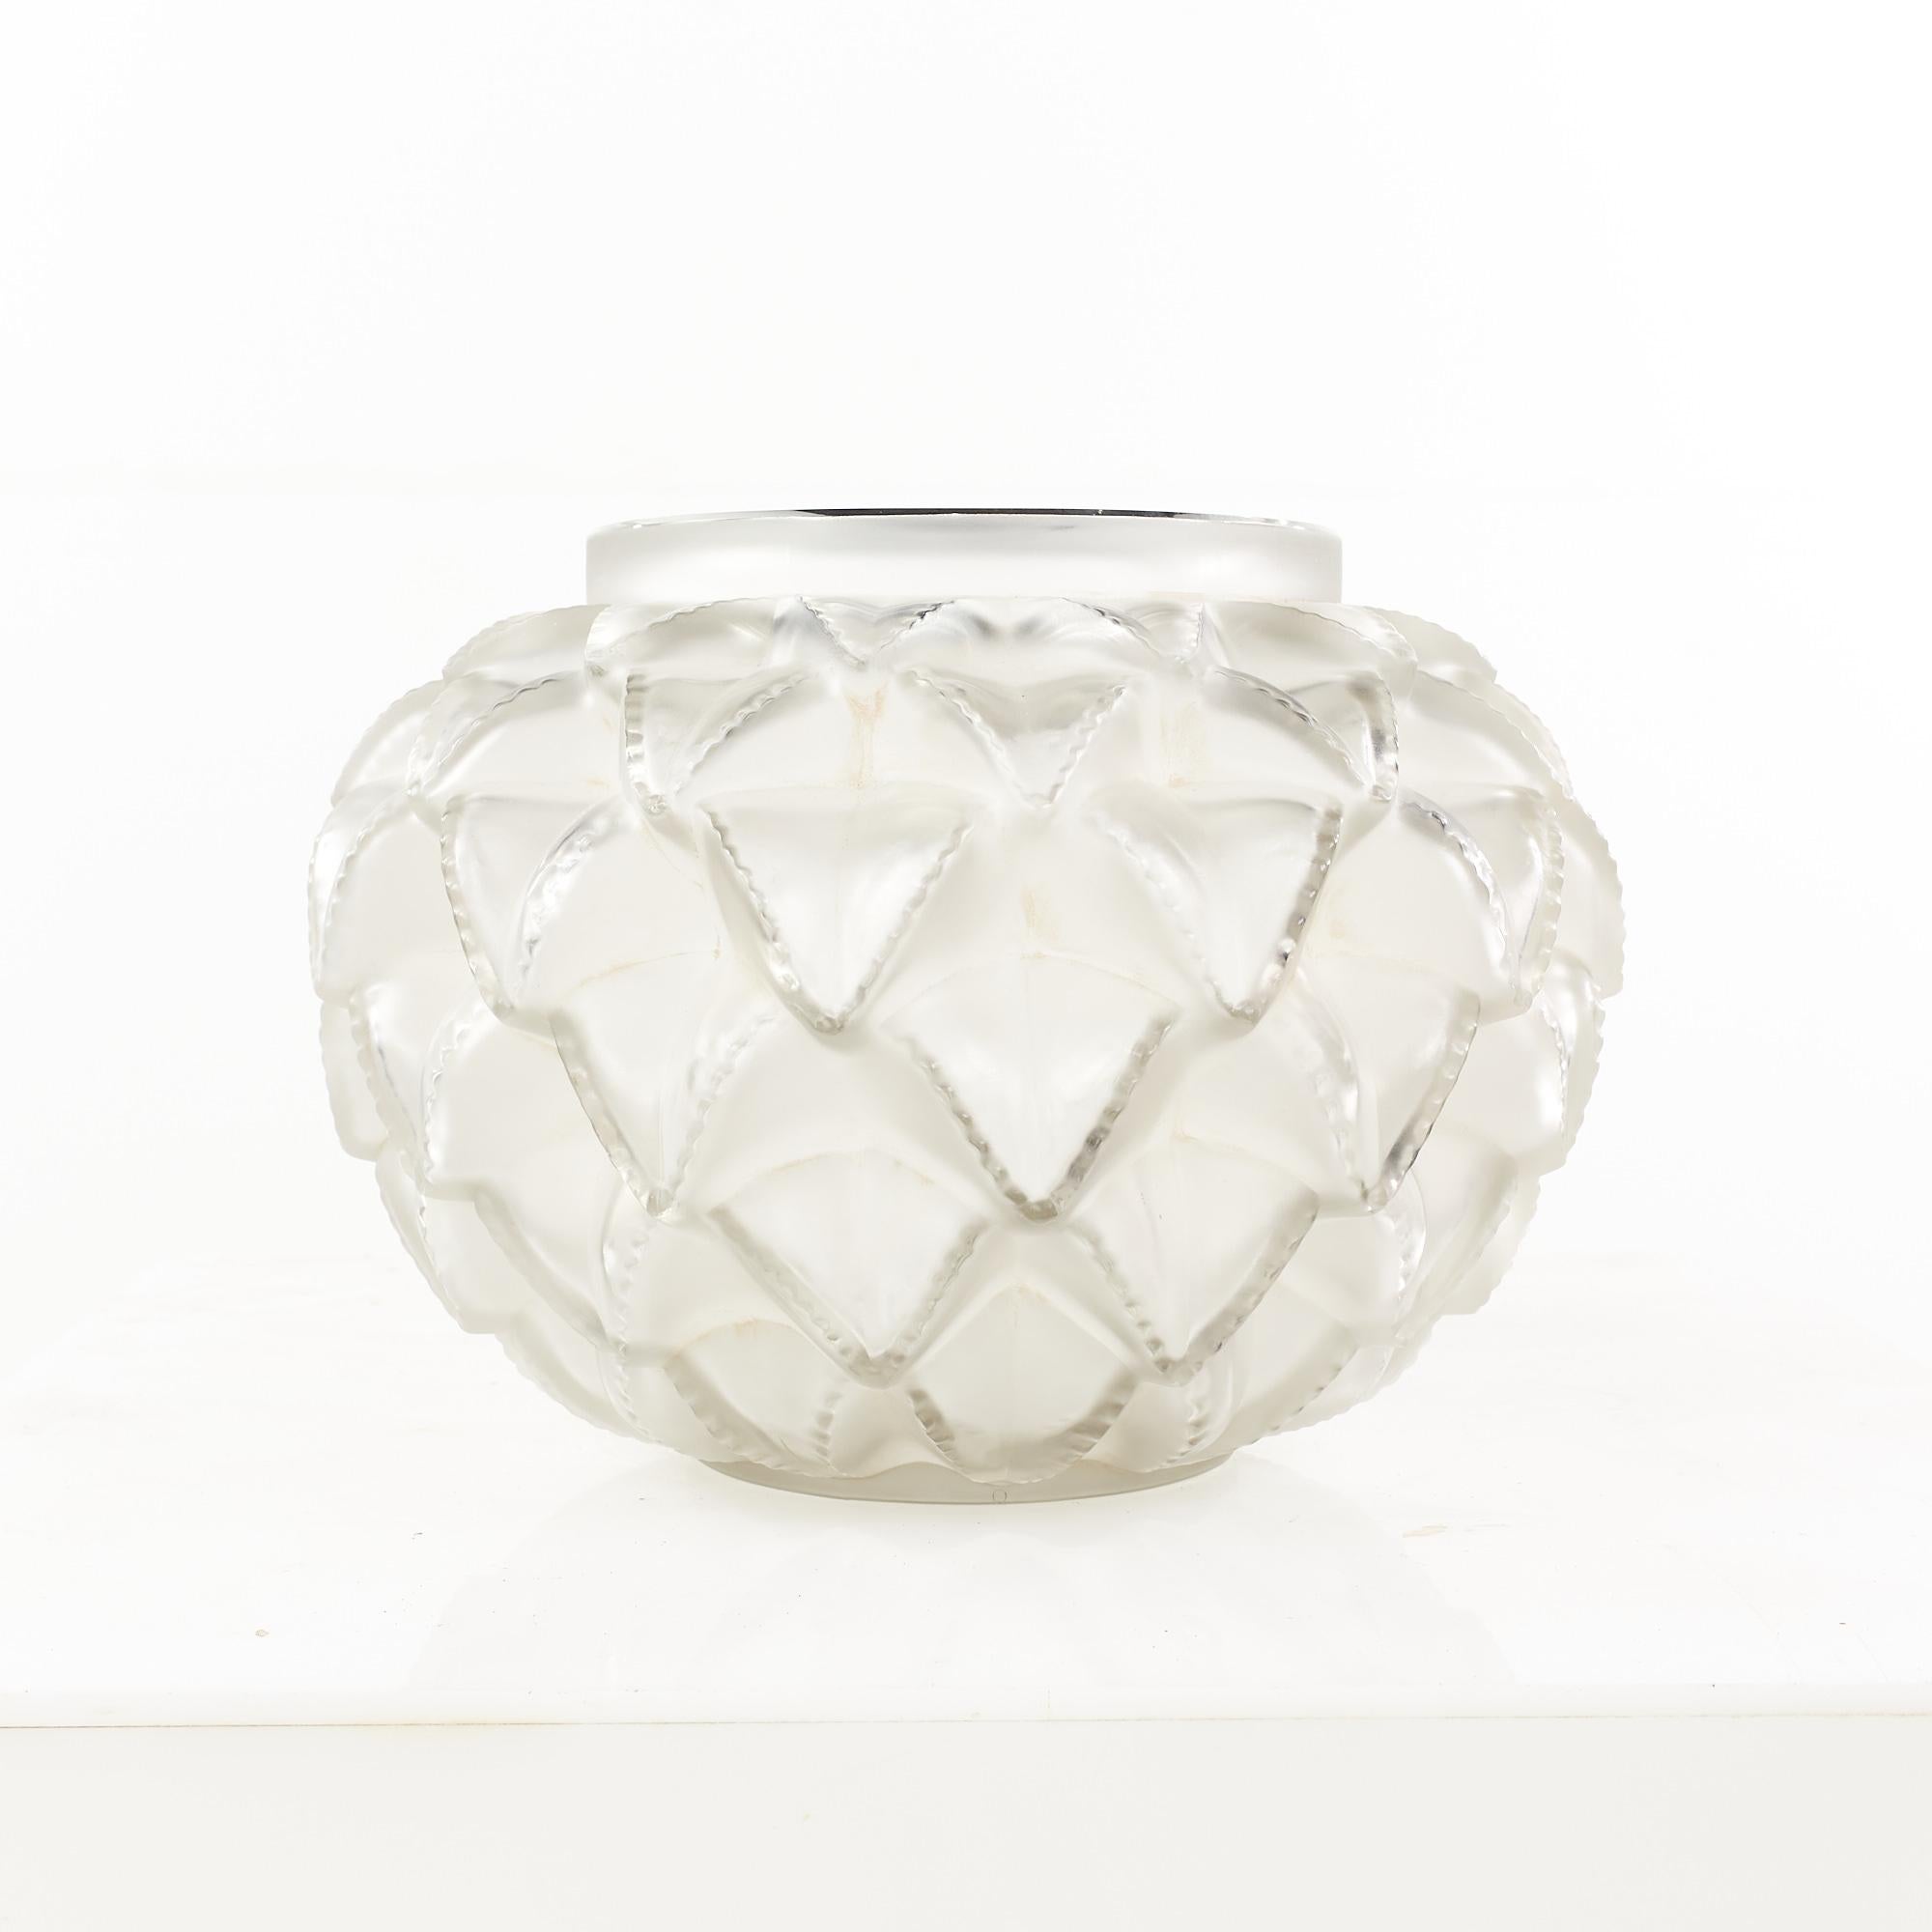 Rene Lalique Languedoc Vase

This vase measures: 12 wide x 12 deep x 8.5 inches high 

This vase is in Excellent Vintage Condition with some general wear from age.

We take our photos in a controlled lighting studio to show as much detail as